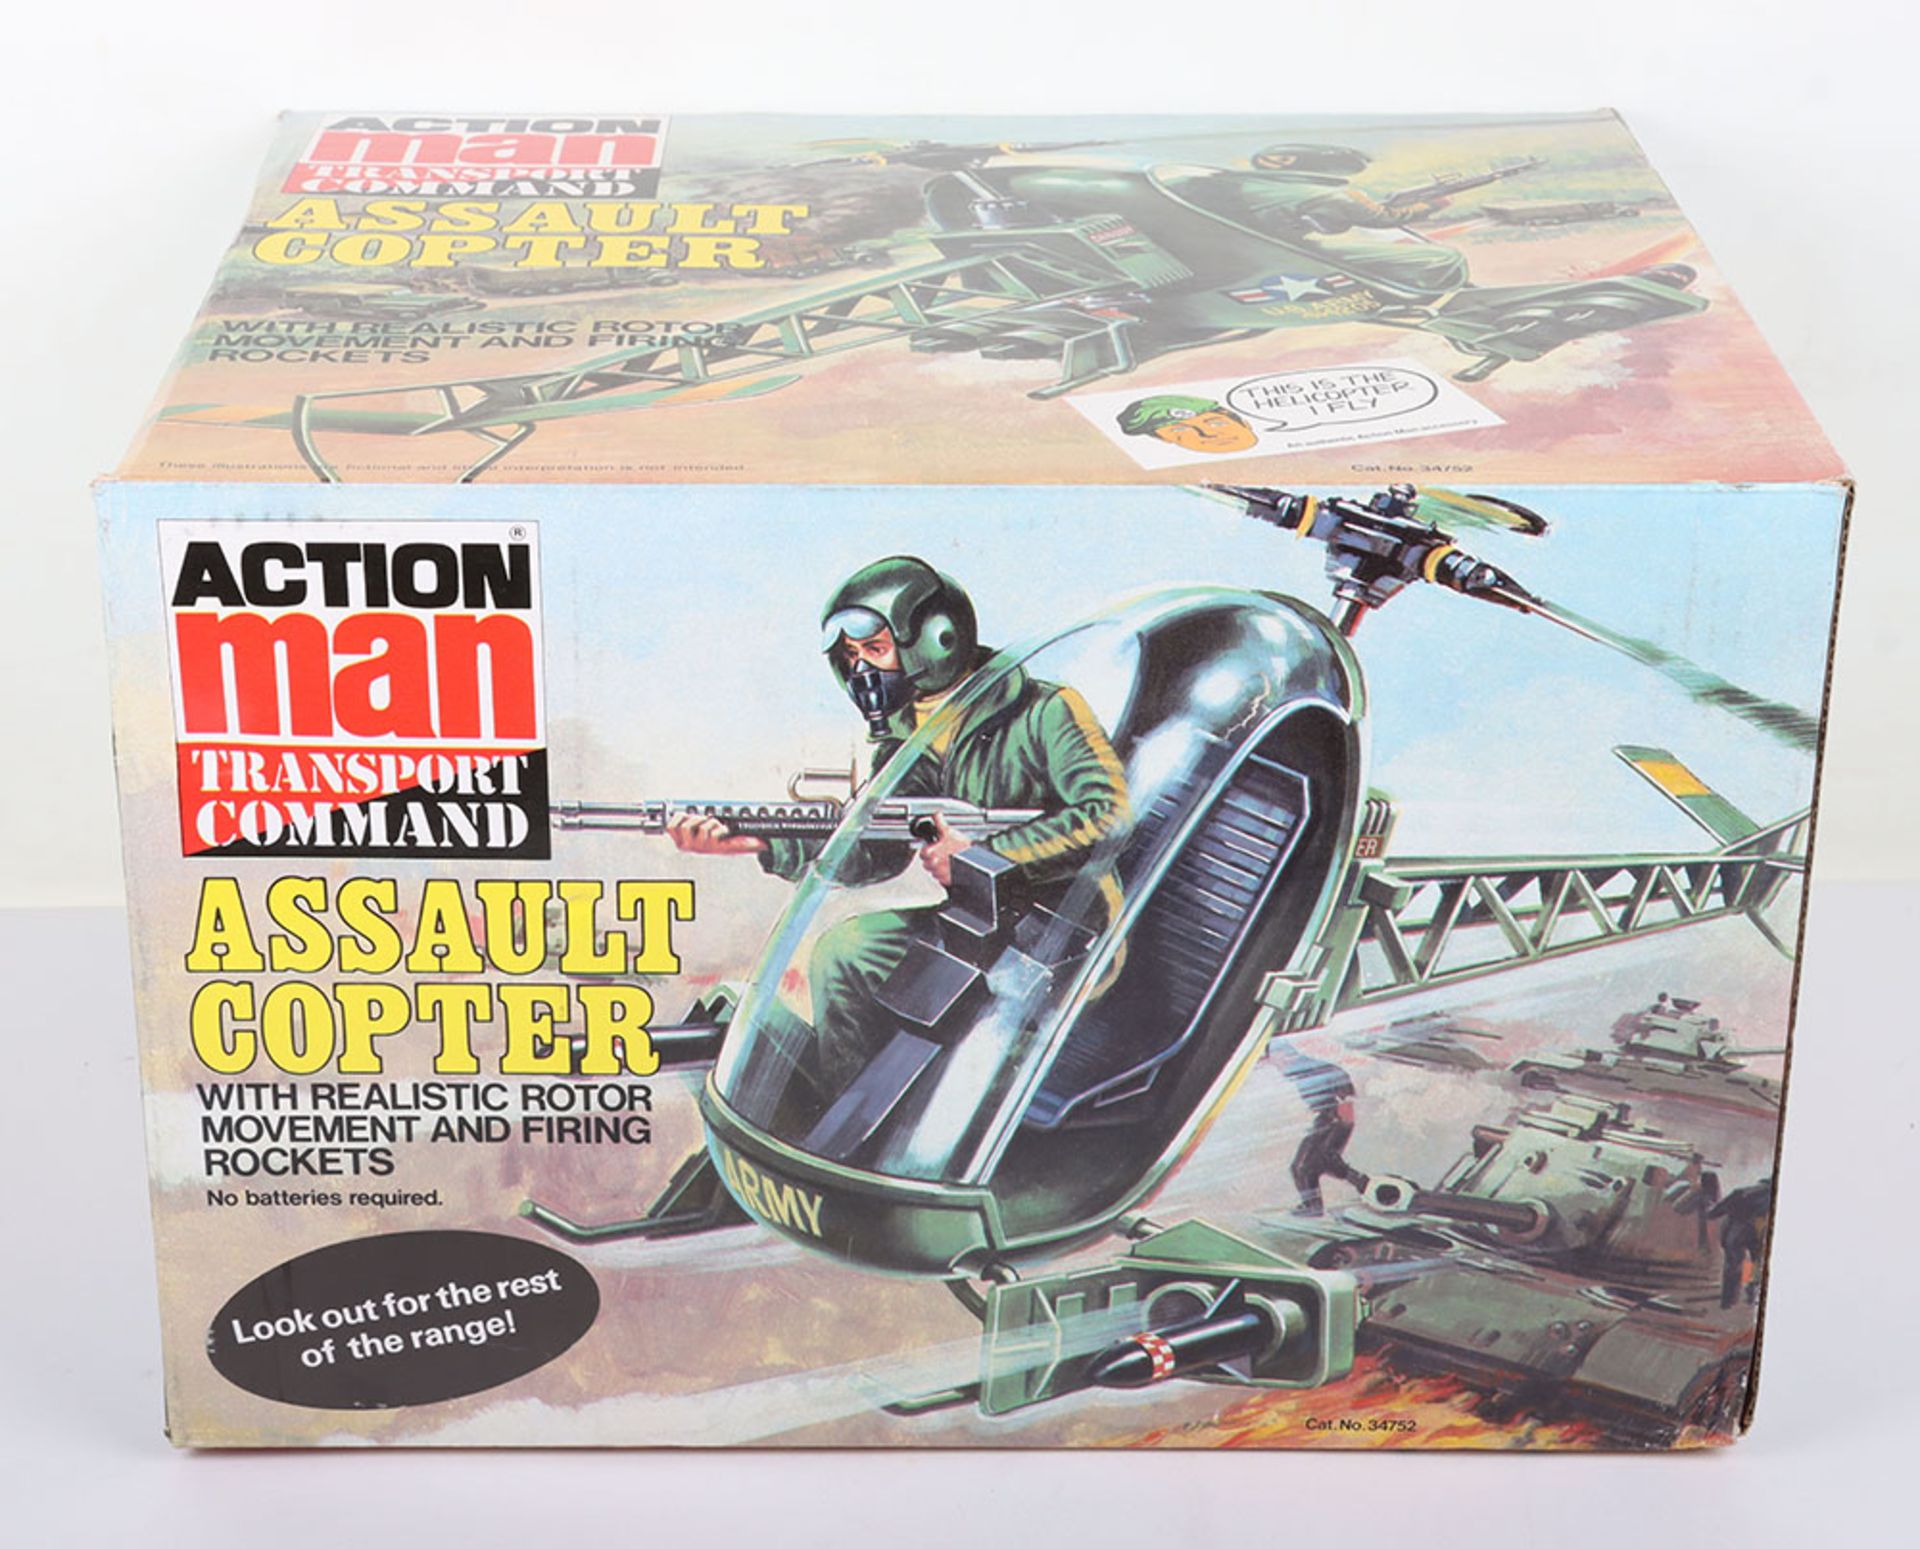 Palitoy Action Man Transport Command Assault Copter - Image 2 of 4